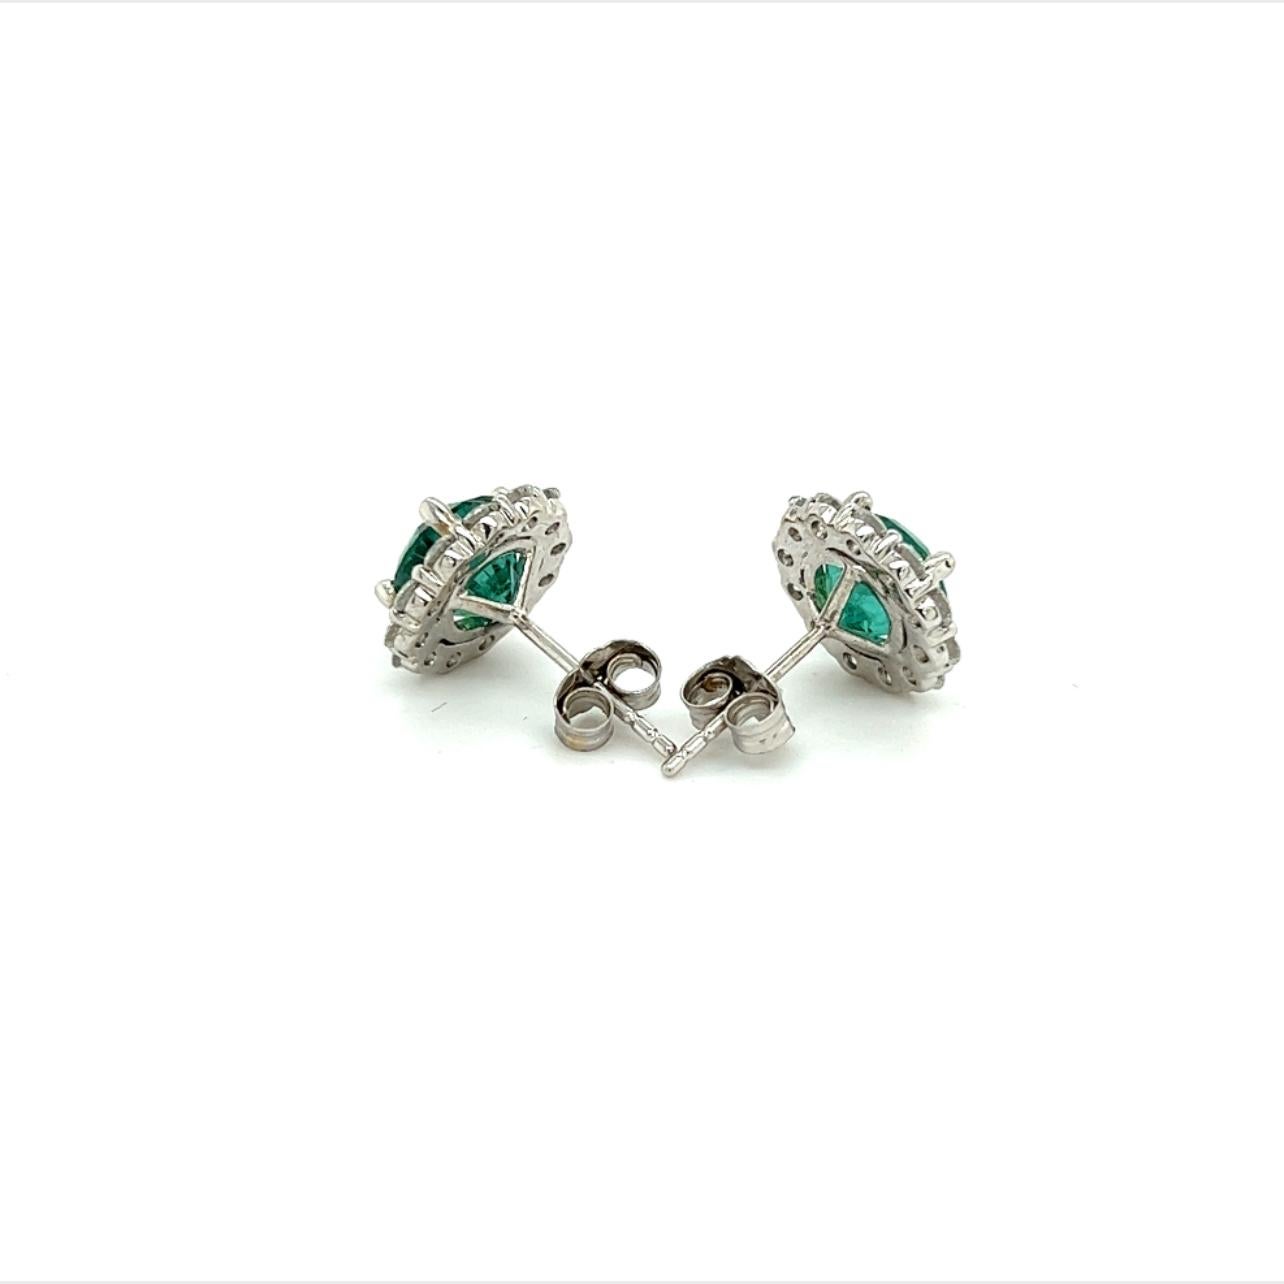 Natural Emerald Diamond Earrings 18k White Gold 3.8 TCW Certified For Sale 1